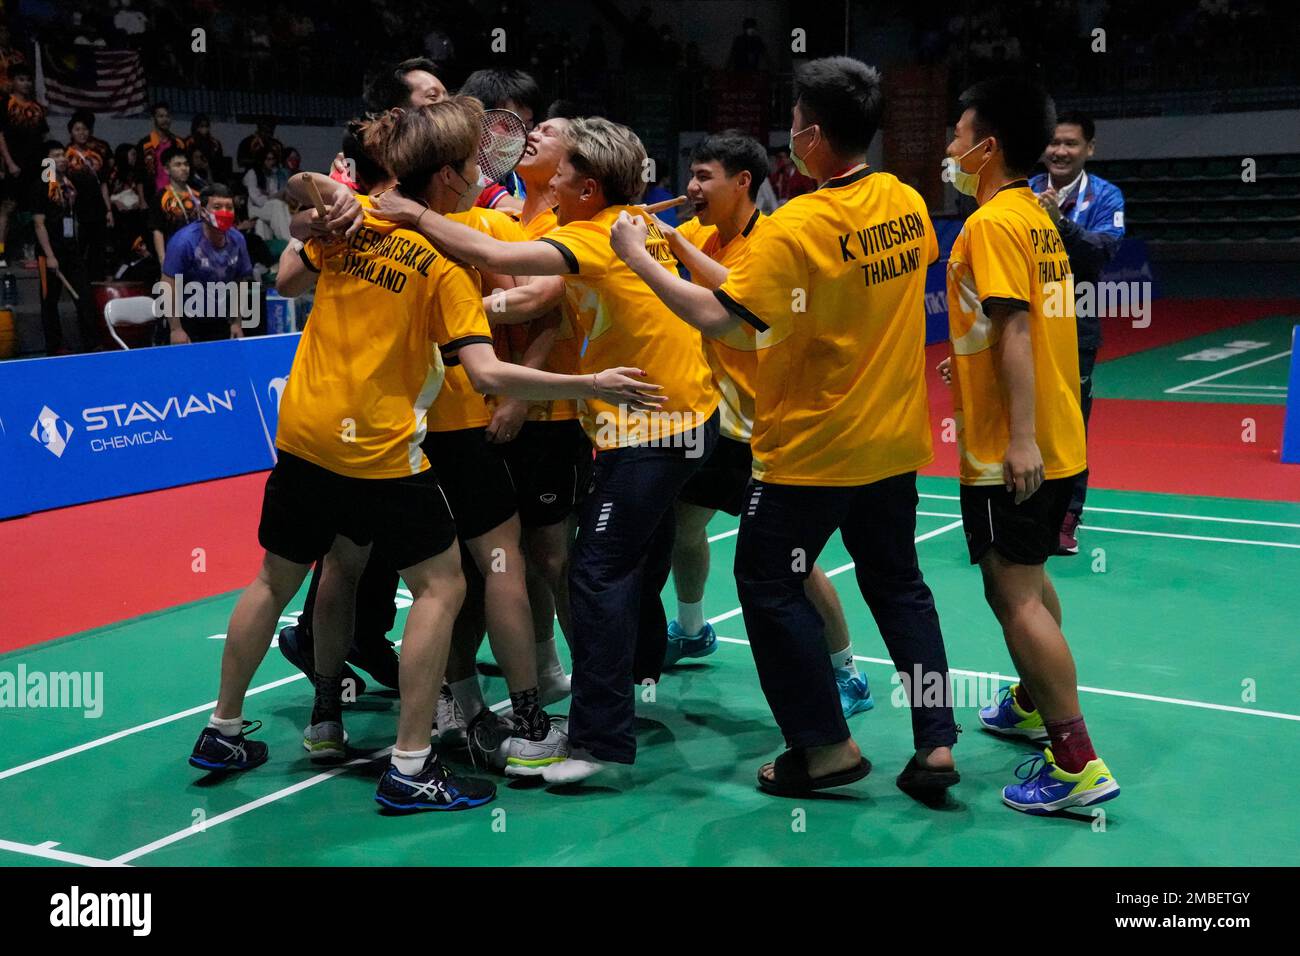 Team Thailand celebrates after defeating Malaysia in their mens team badminton final match at the 31st Southeast Asian Games (SEA Games), Wednesday, May 18, 2022 in Bac Giang, Vietnam